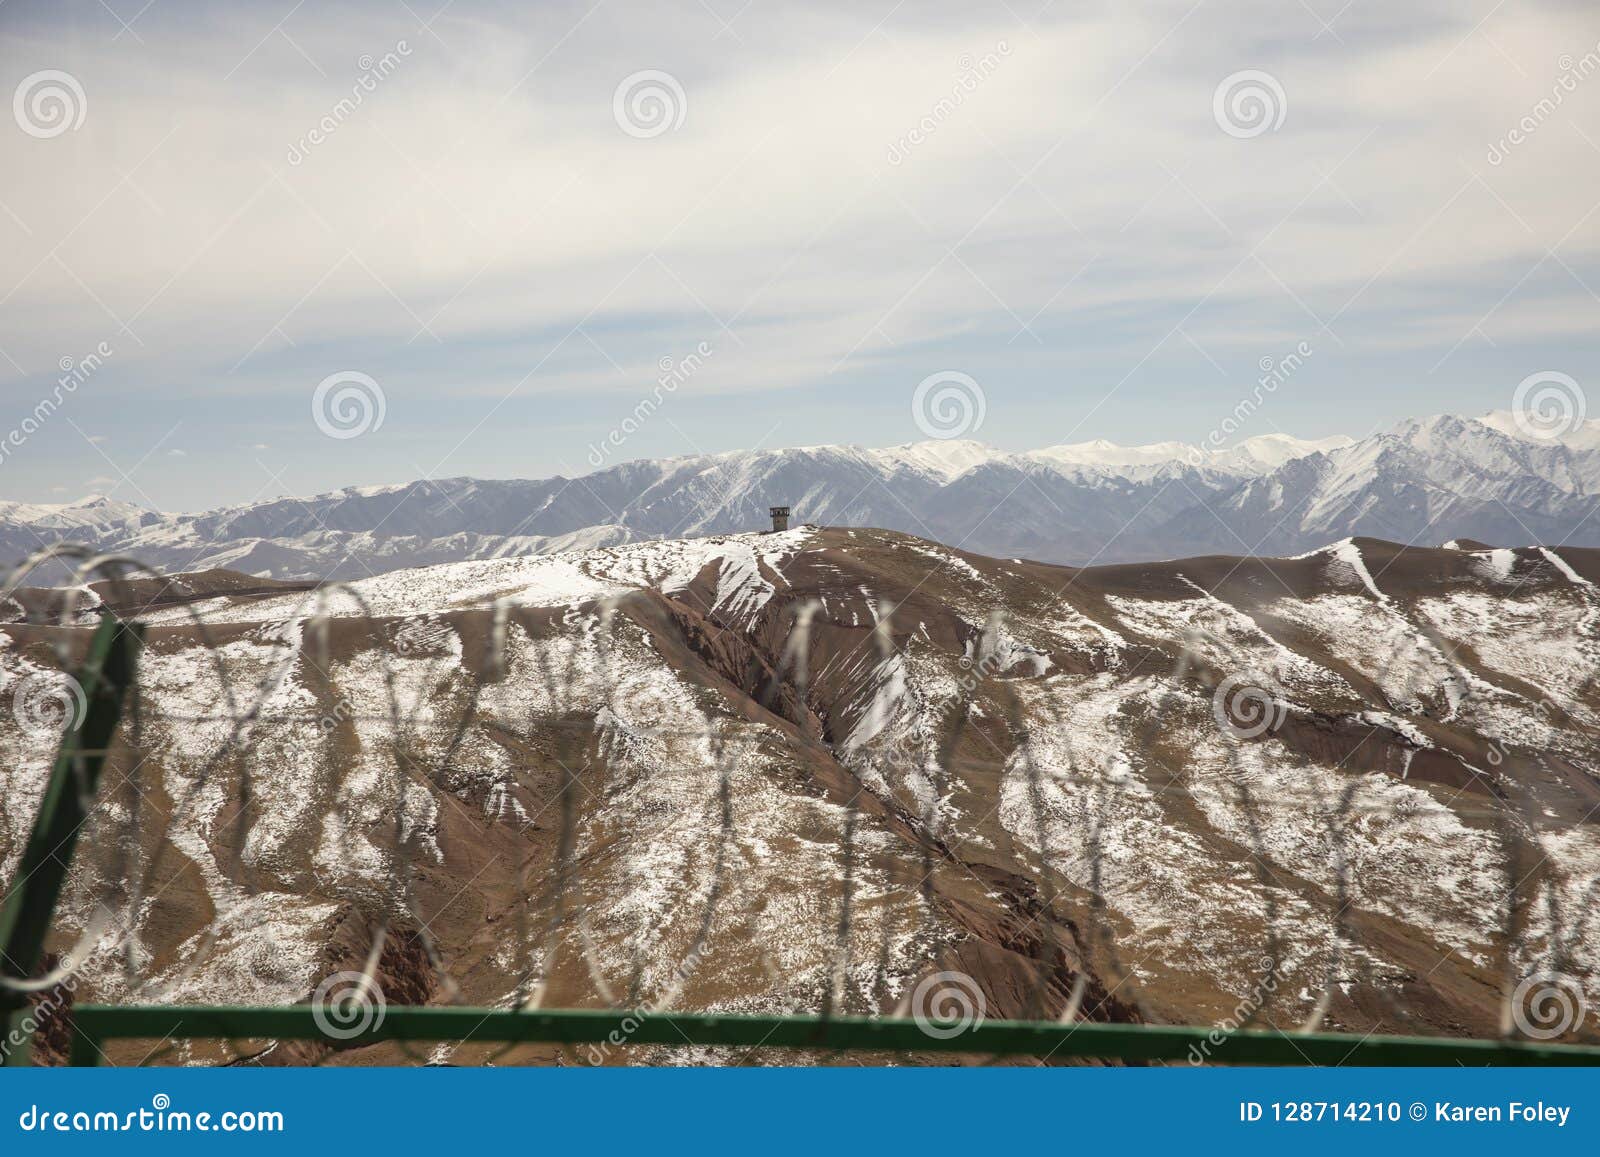 security guard outpost in tien shan mountains